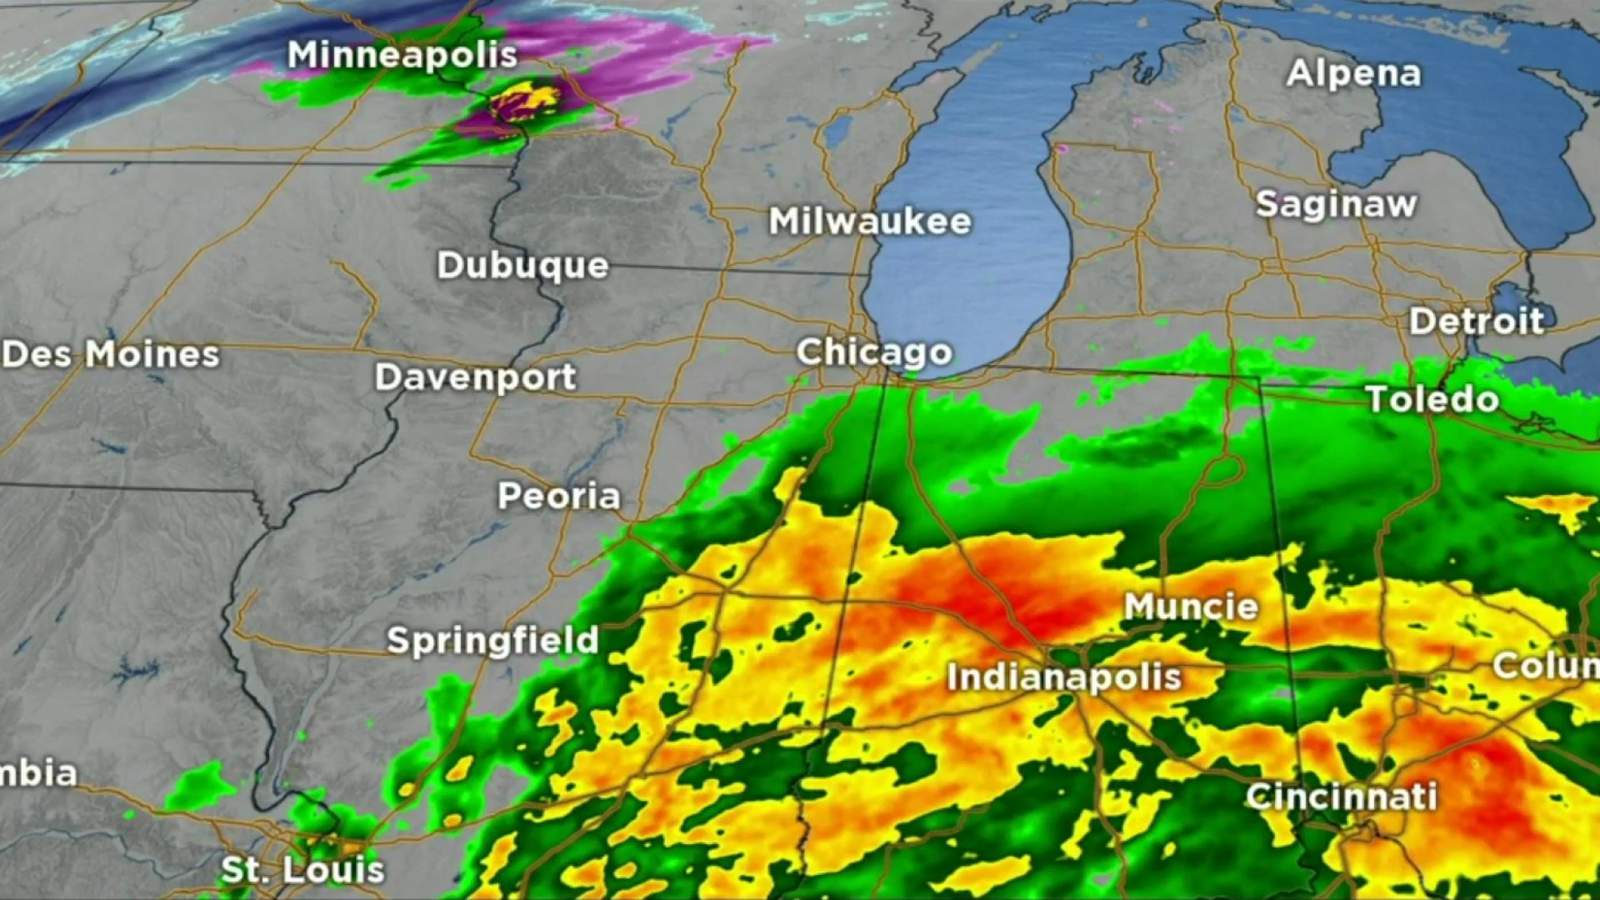 Metro Detroit weather: Chilly Sunday morning, milder afternoon with some rain